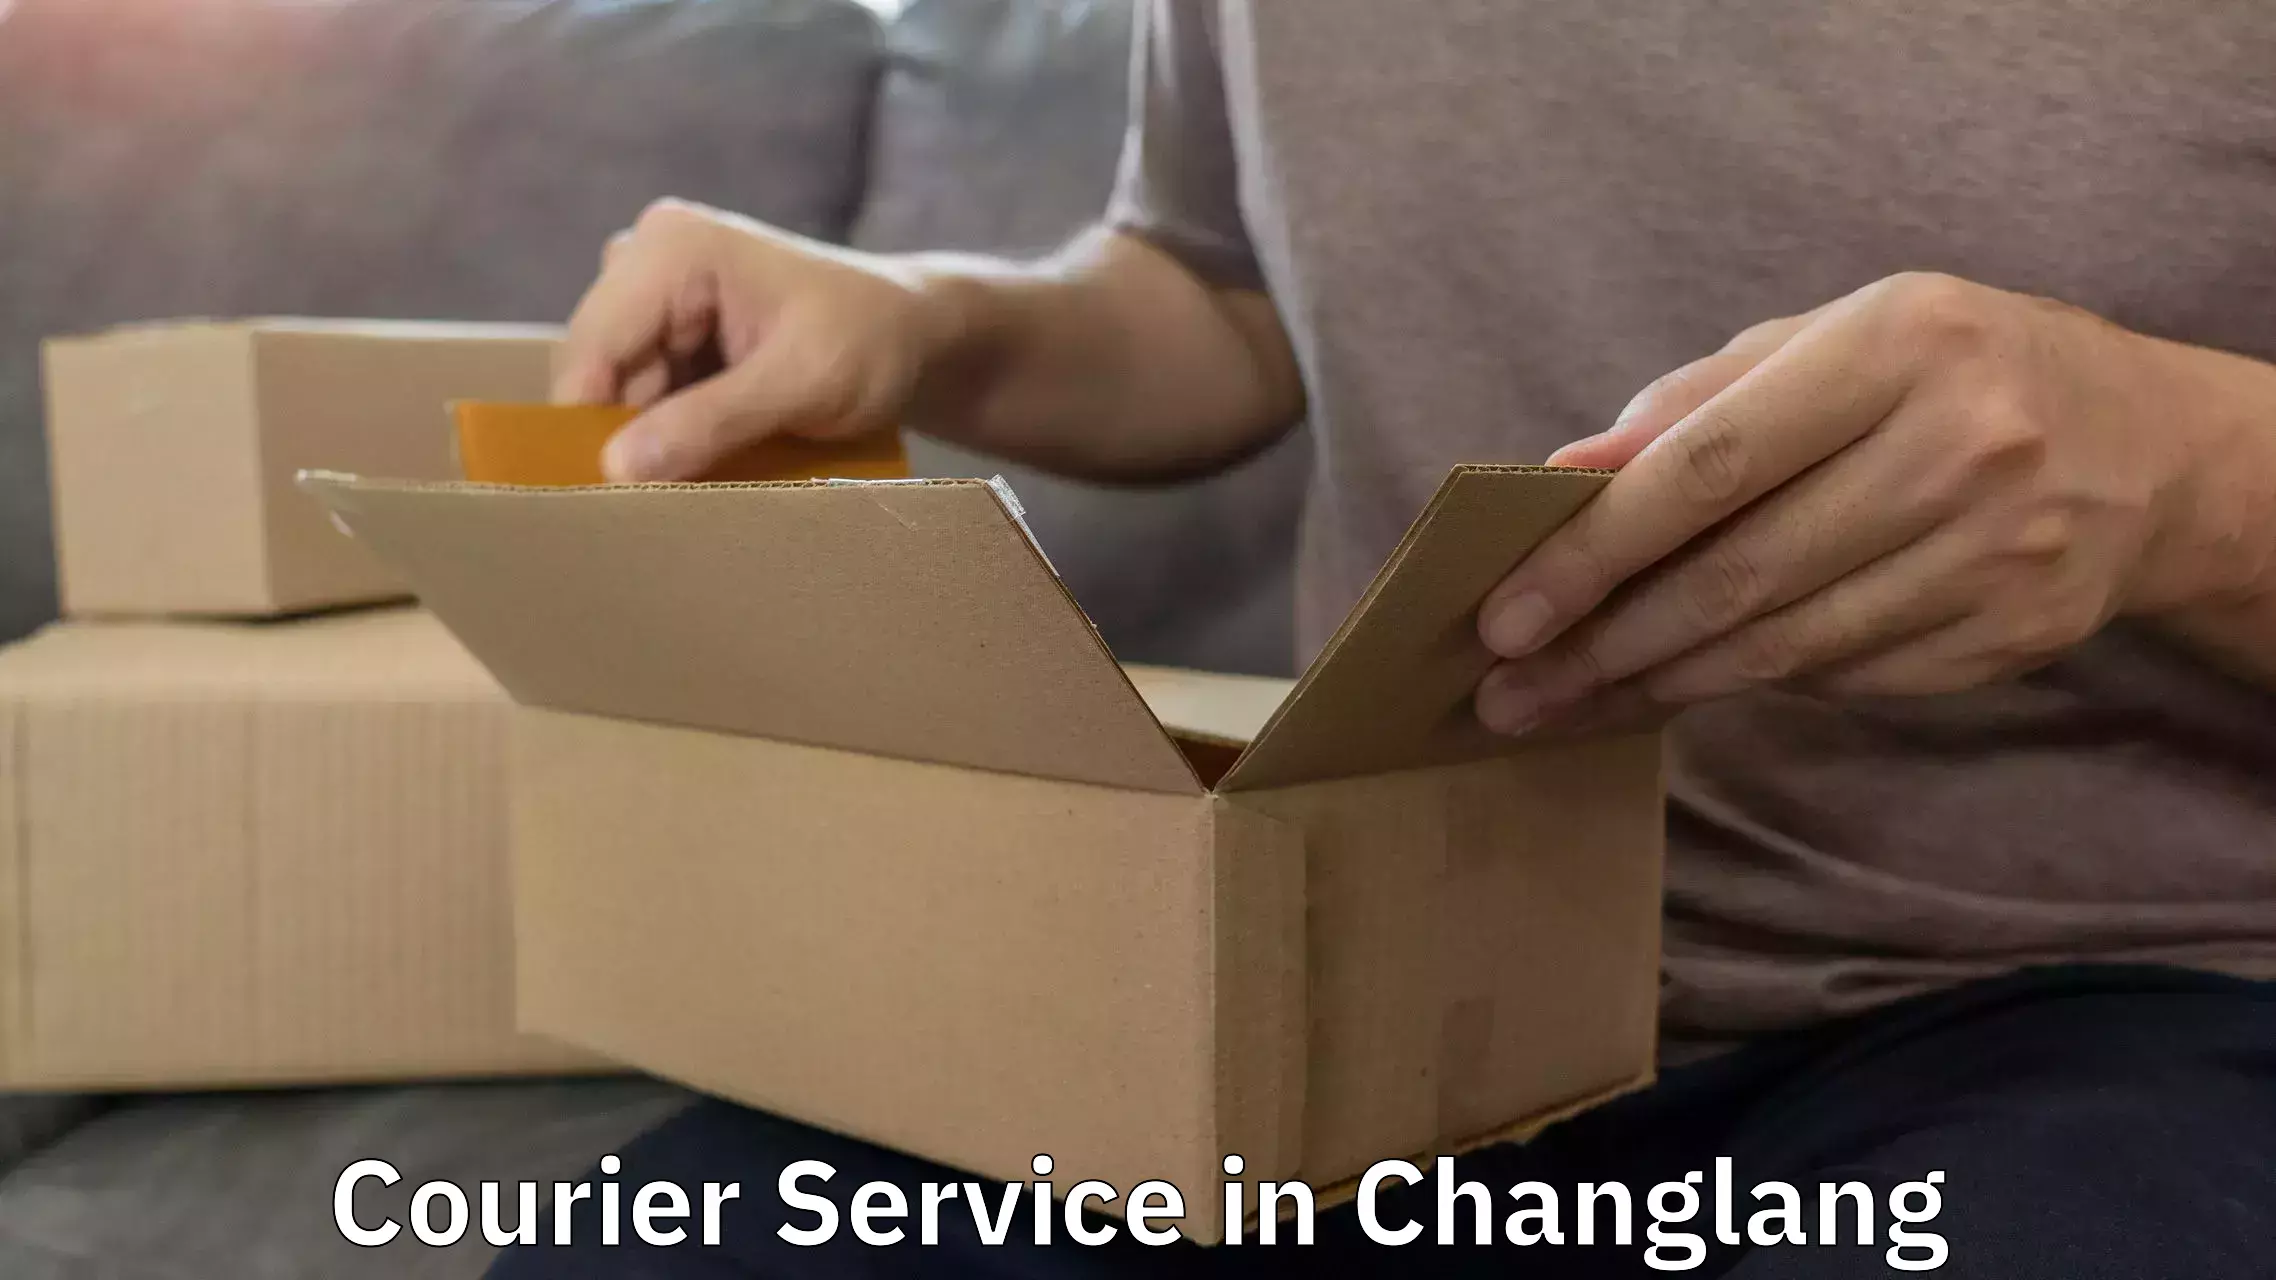 Express courier facilities in Changlang